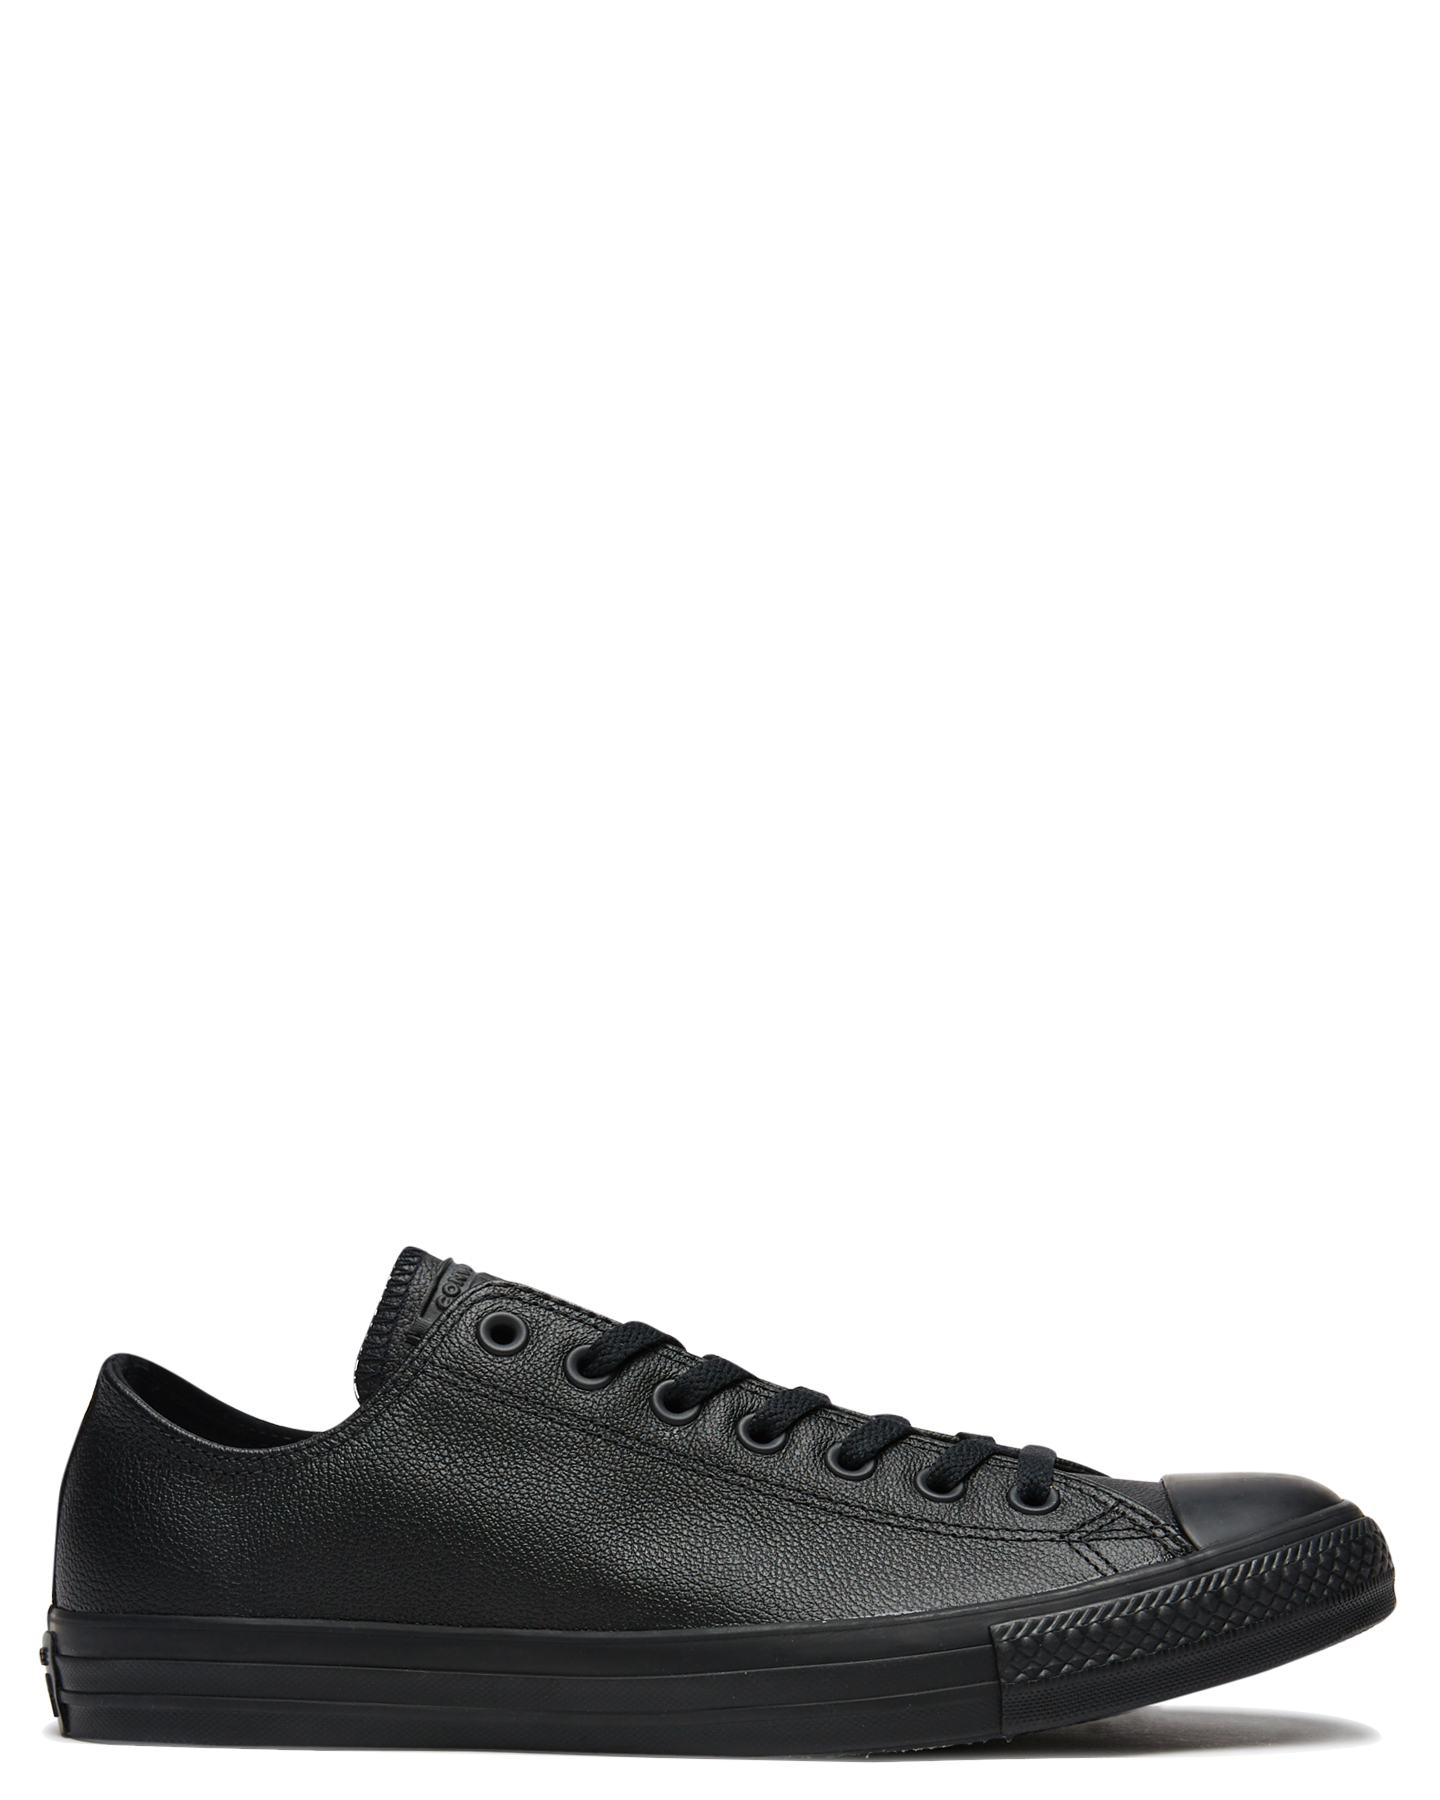 Converse Mens Chuck Taylor All Star Lo Leather Shoe - Black Monochrome |  SurfStitch